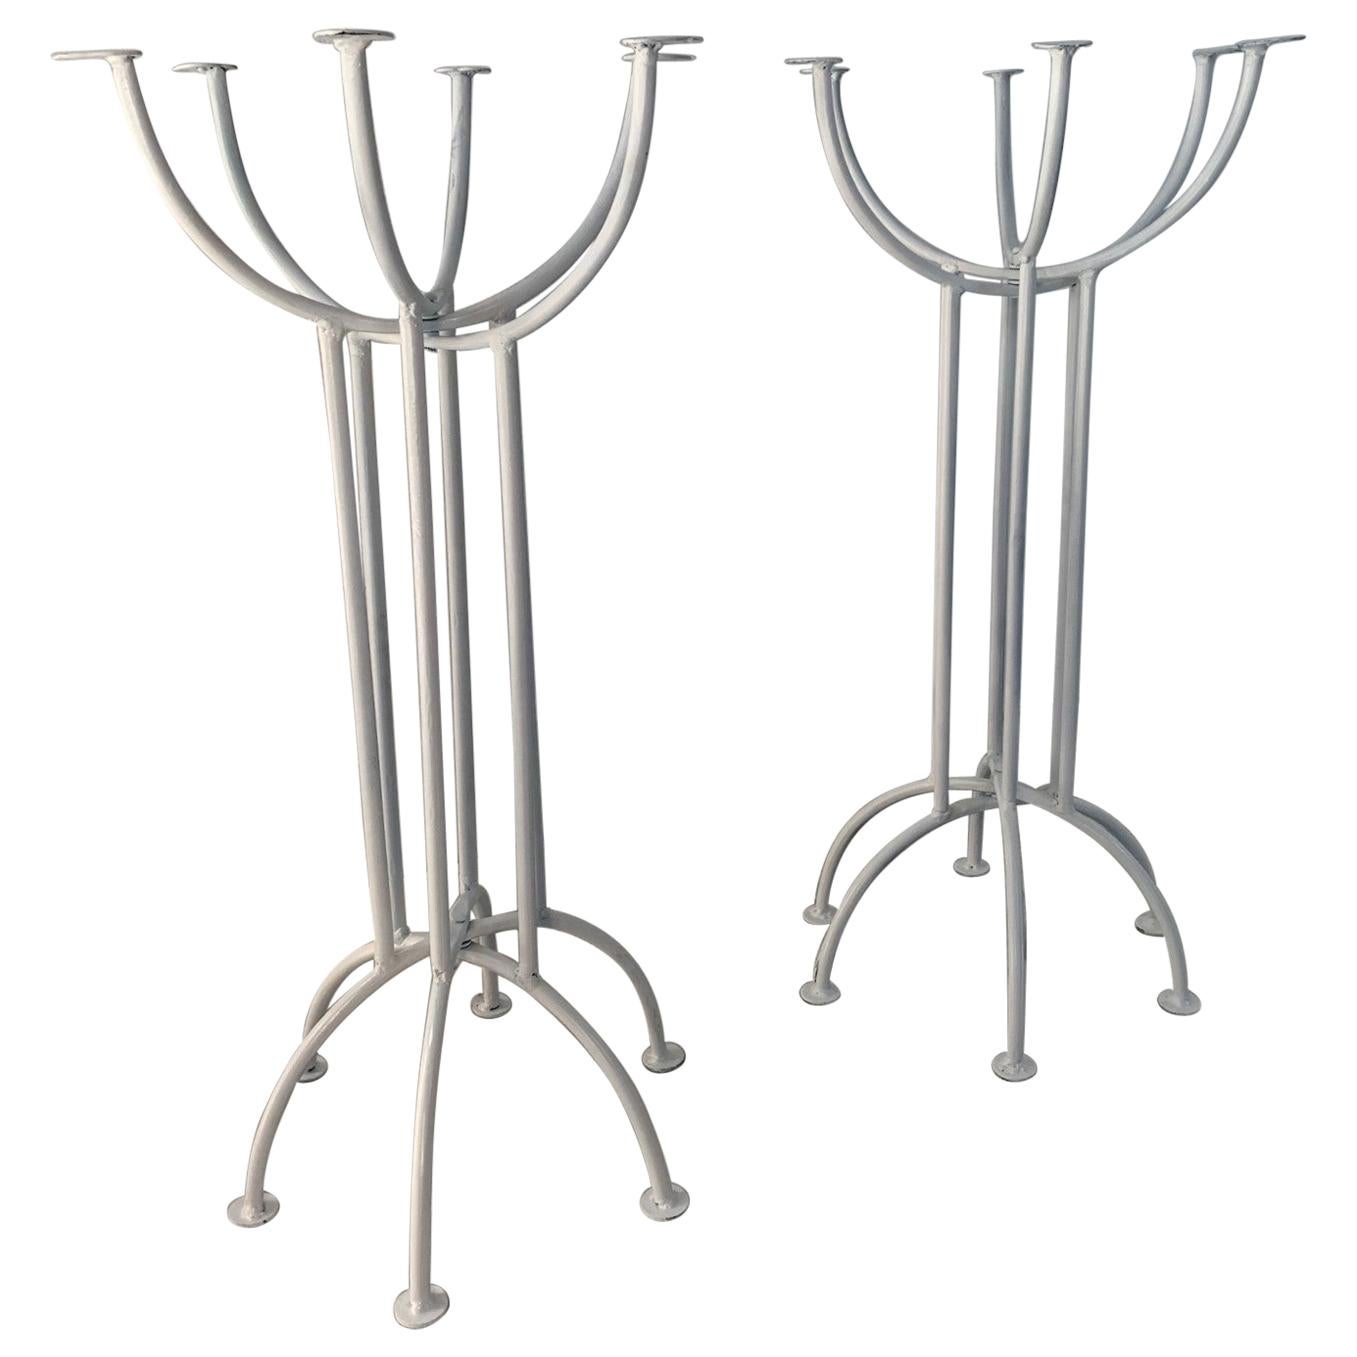 Pair of 1950s French Wrought Iron Planters